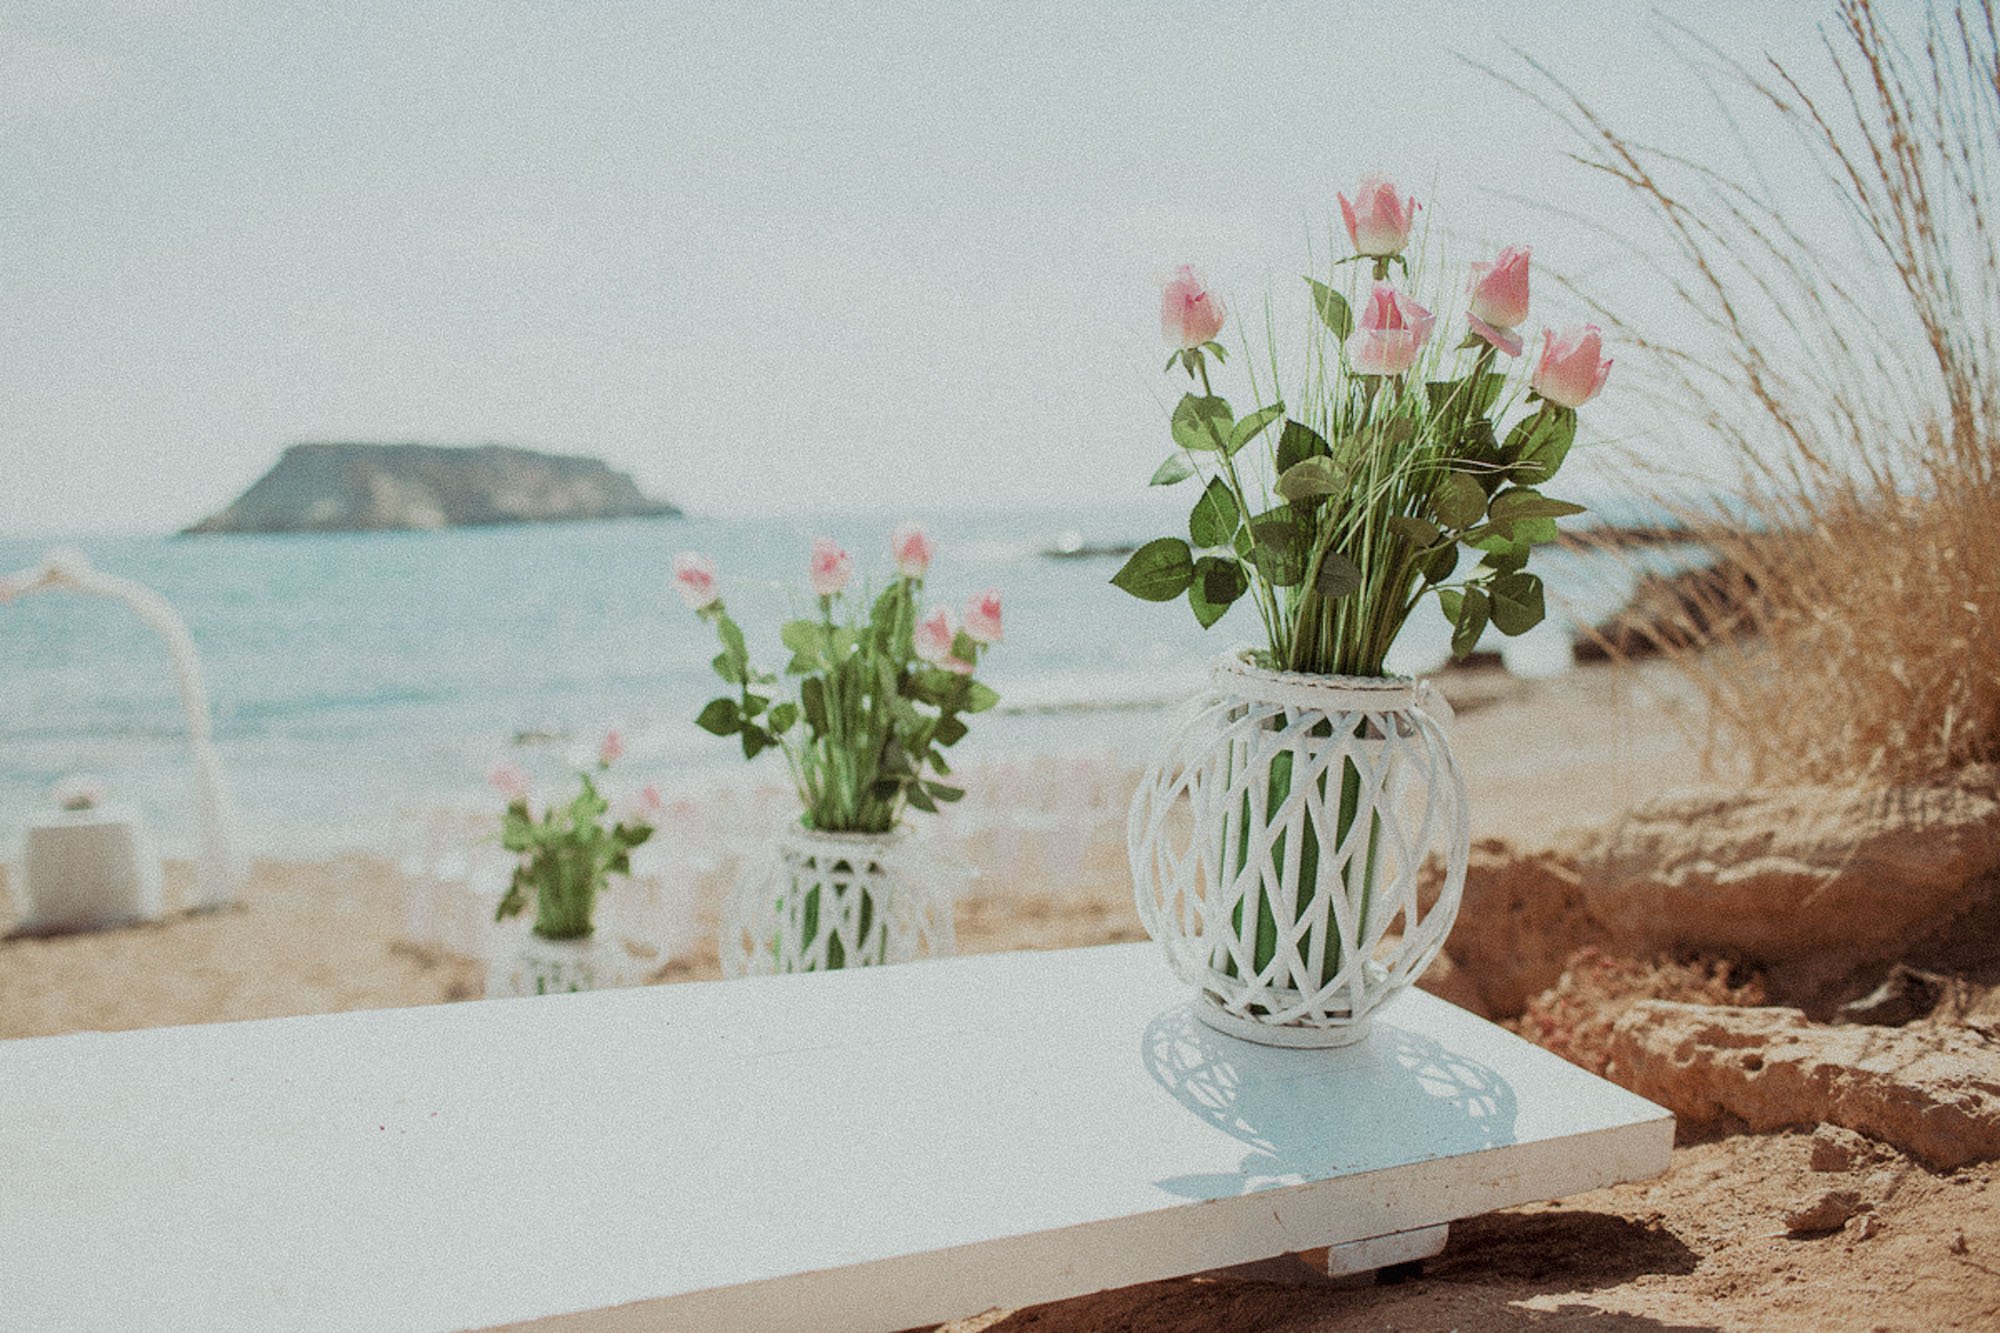 Wedding decoration photography at St George's Beach, Peyia, Paphos, Cyprus.